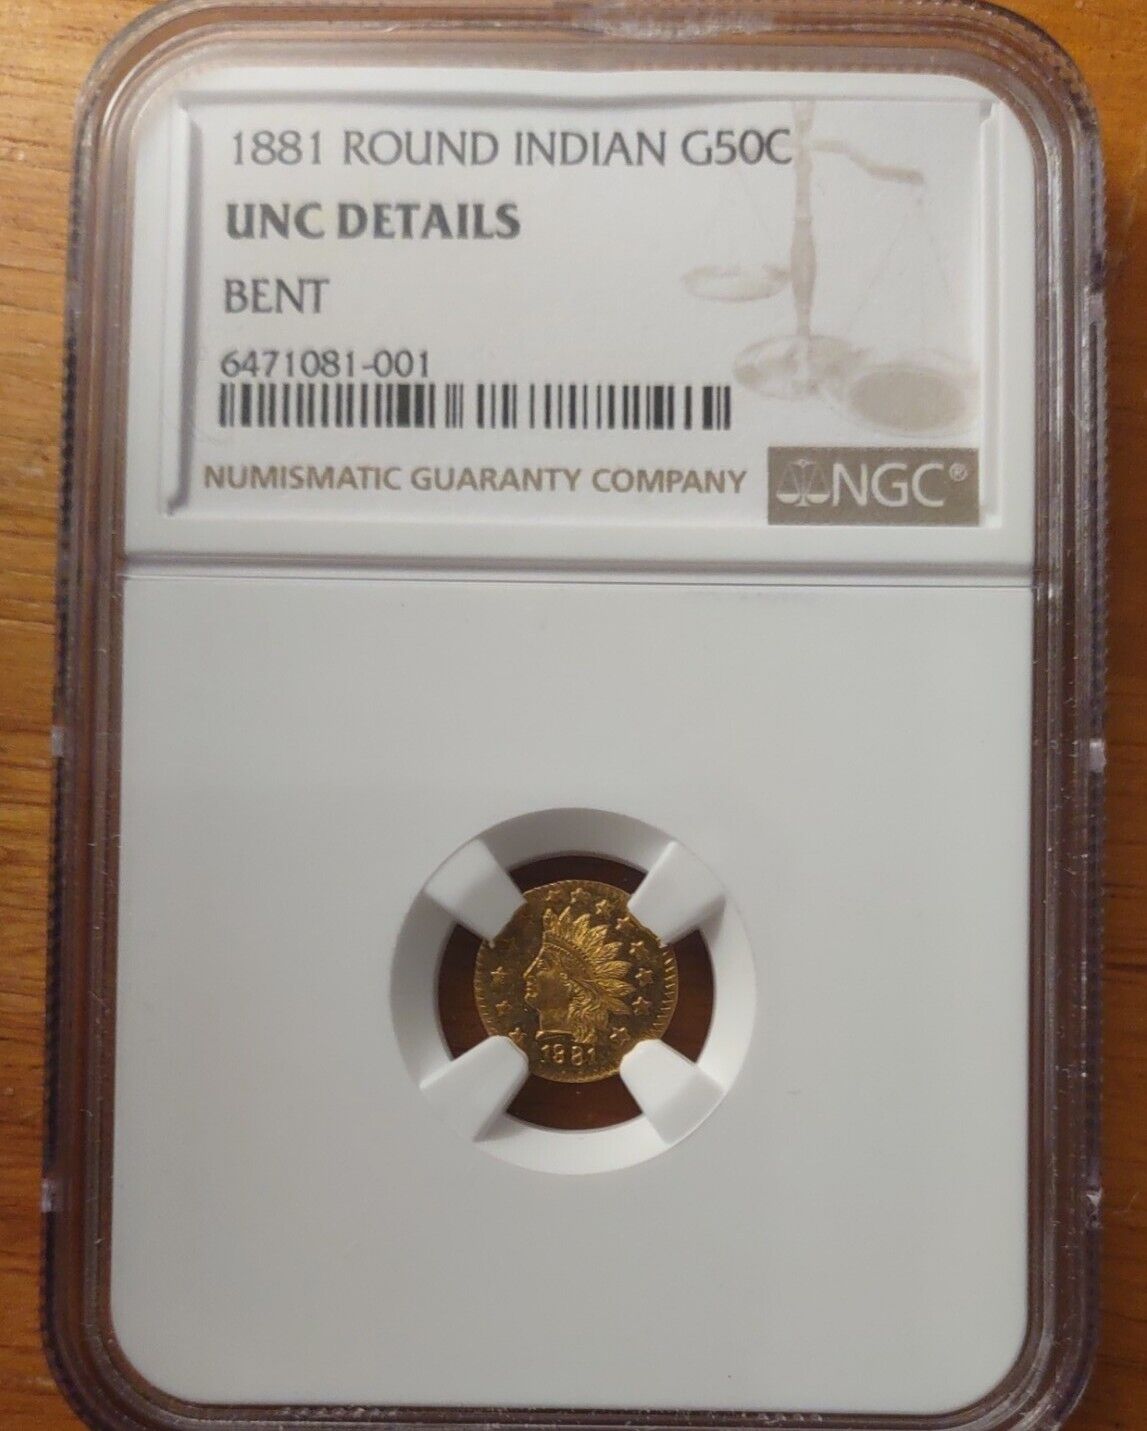 1881 Round Indian G50c Gold Coin Unc Details Bent Ngc (a)